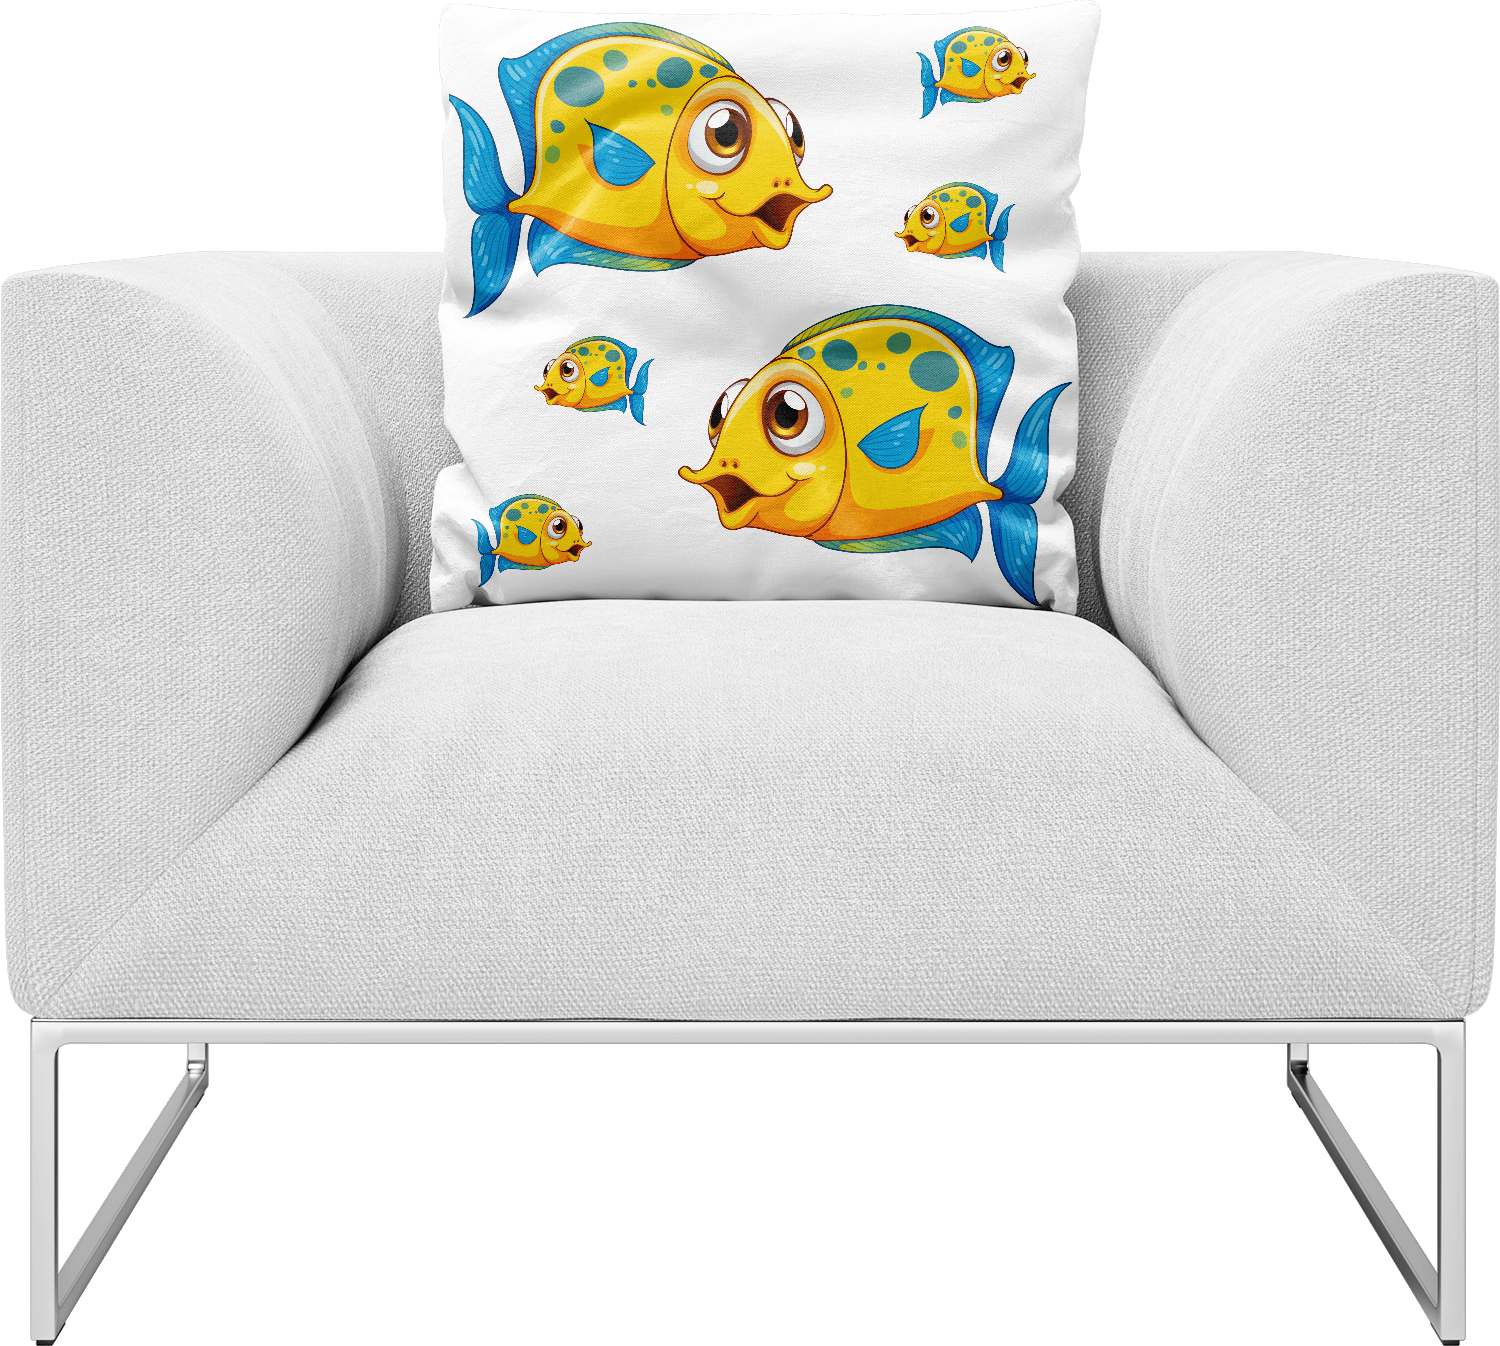 Fish Out Of Water Pillows Cushions - fungear.com.au